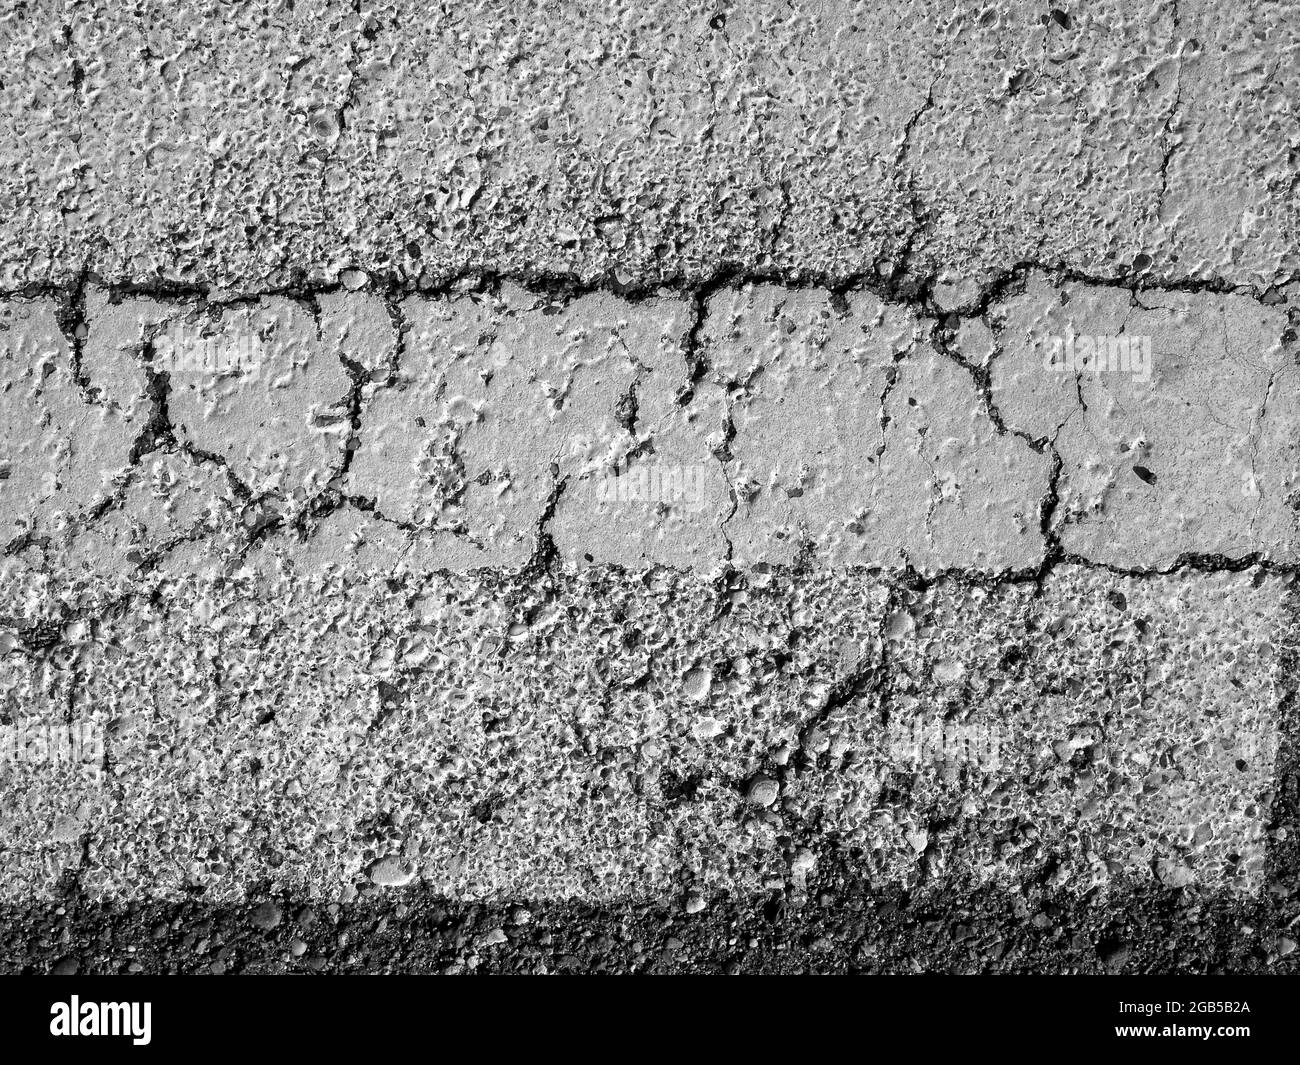 Cracks in the concrete textured background image Stock Photo